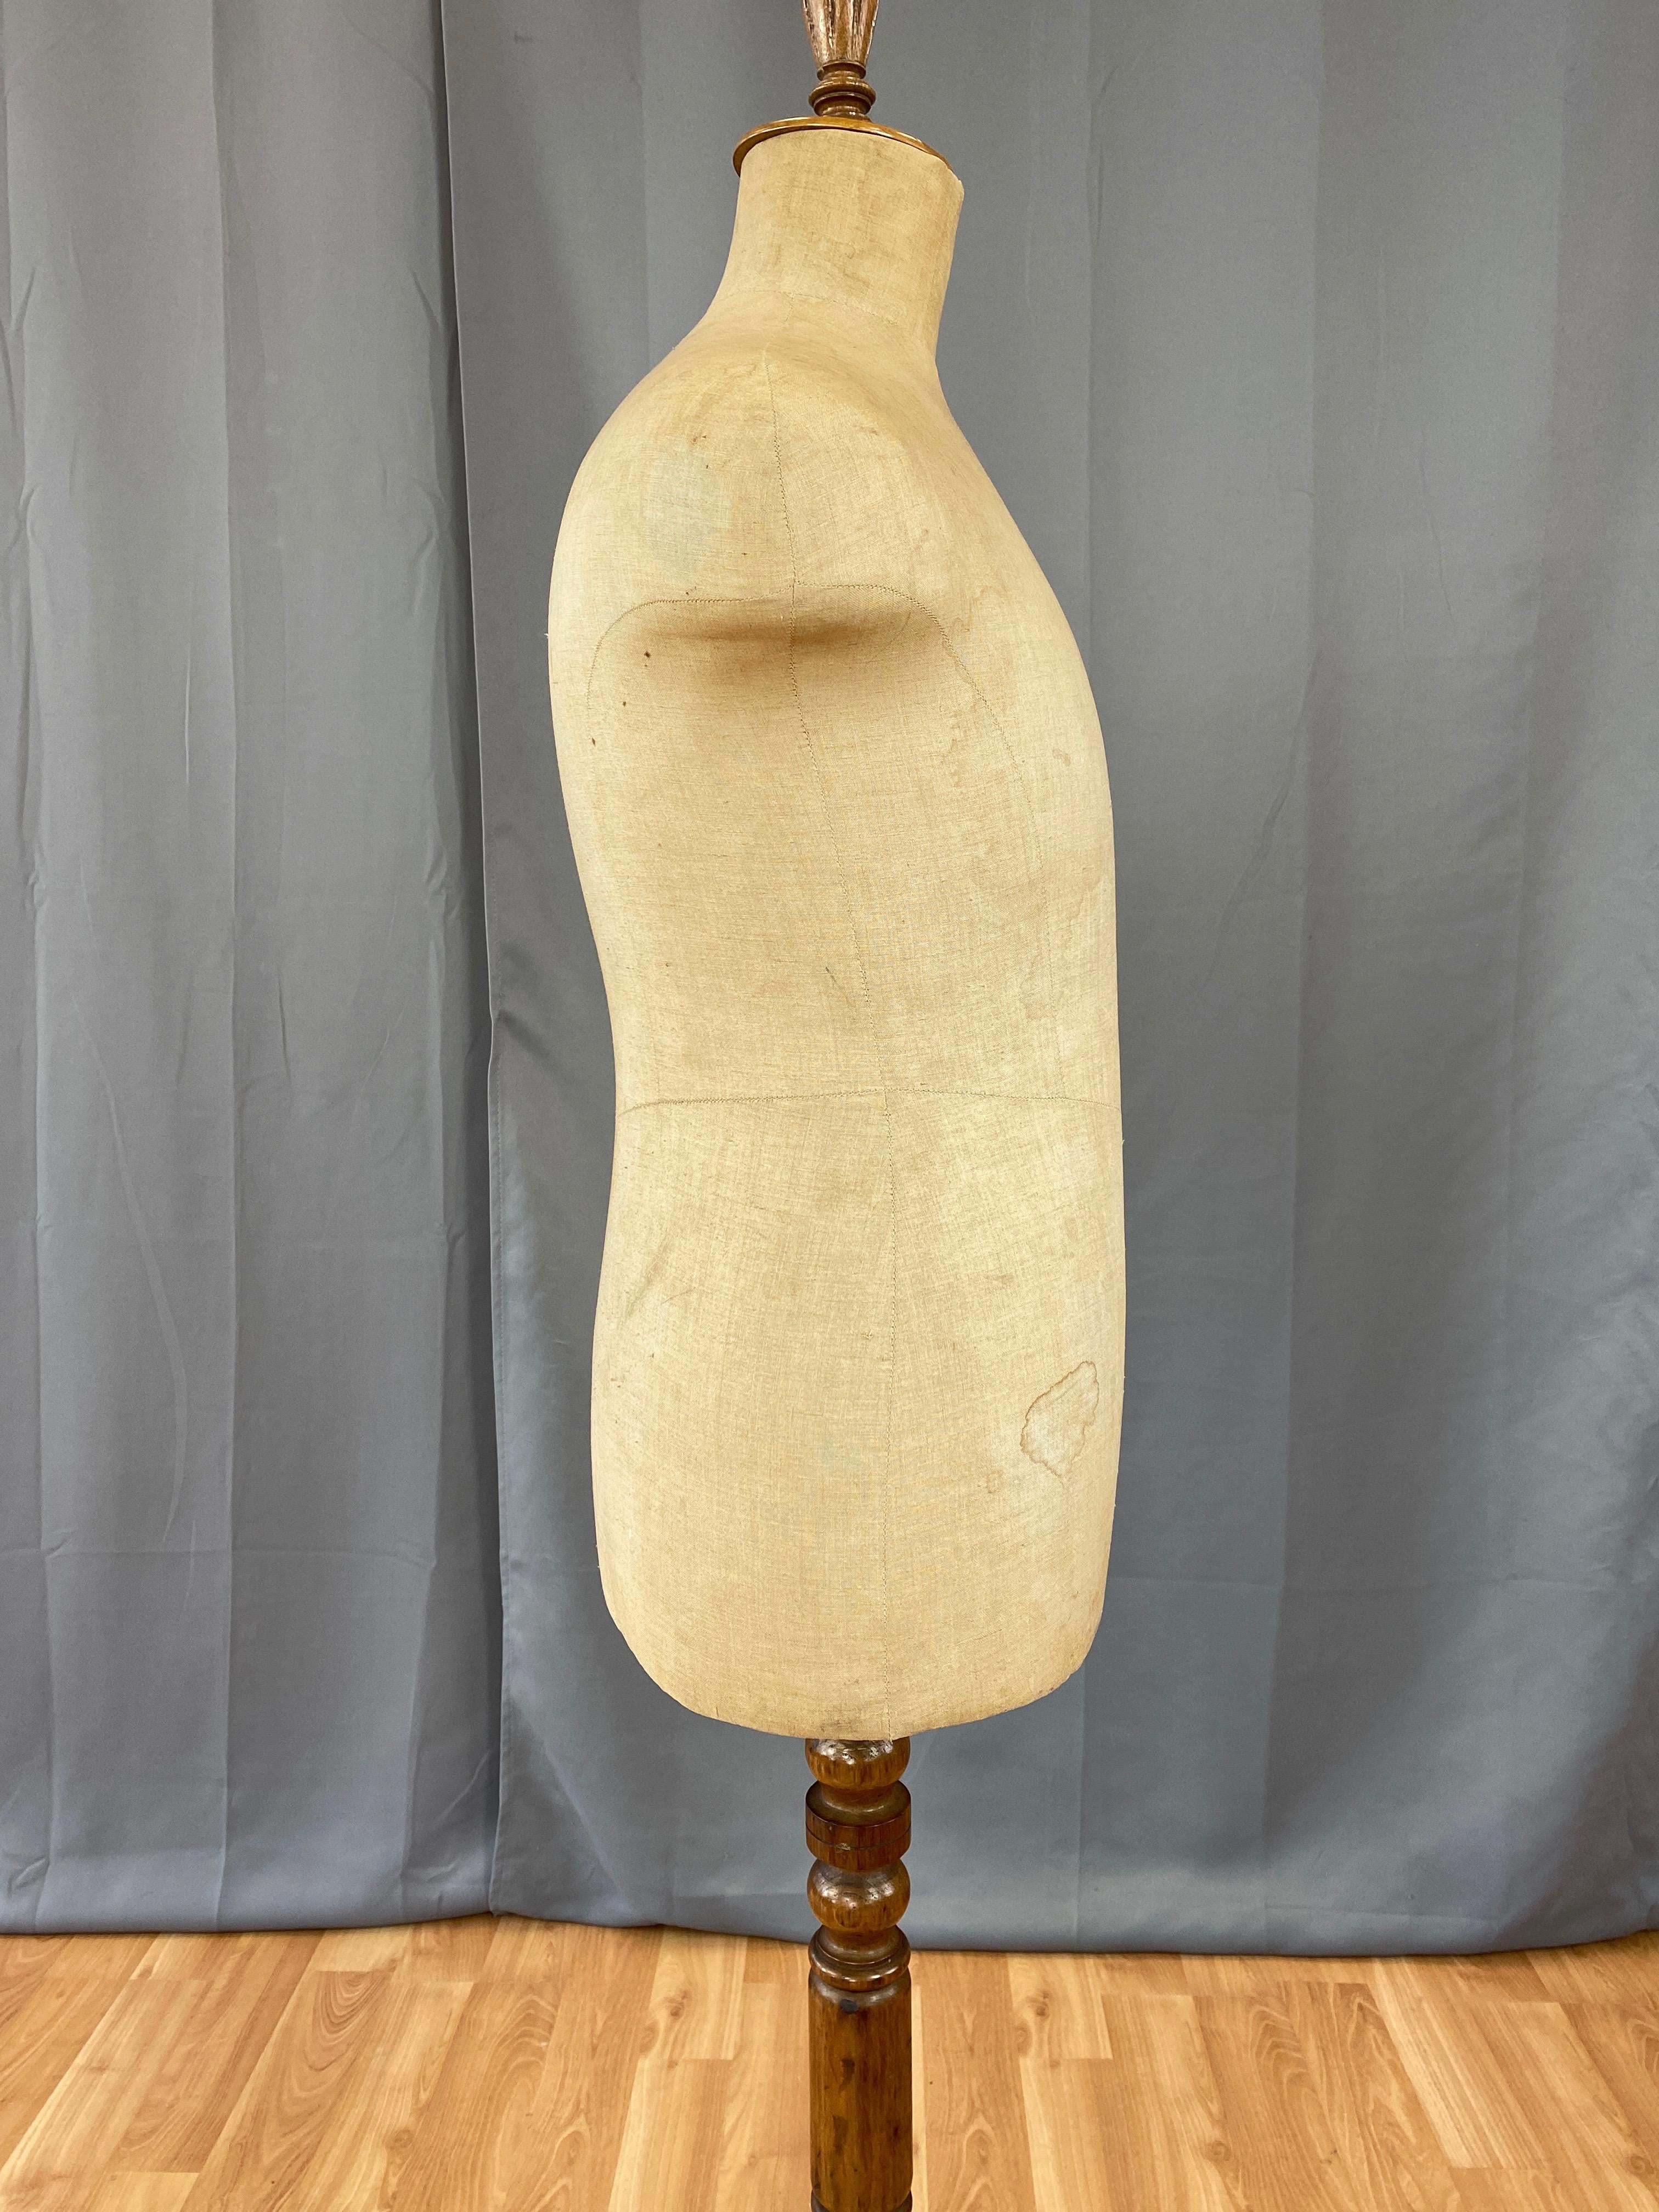 Early 20th Century Antique Harris & Sheldon Tailor’s Mannequin or Display Form, c. 1910